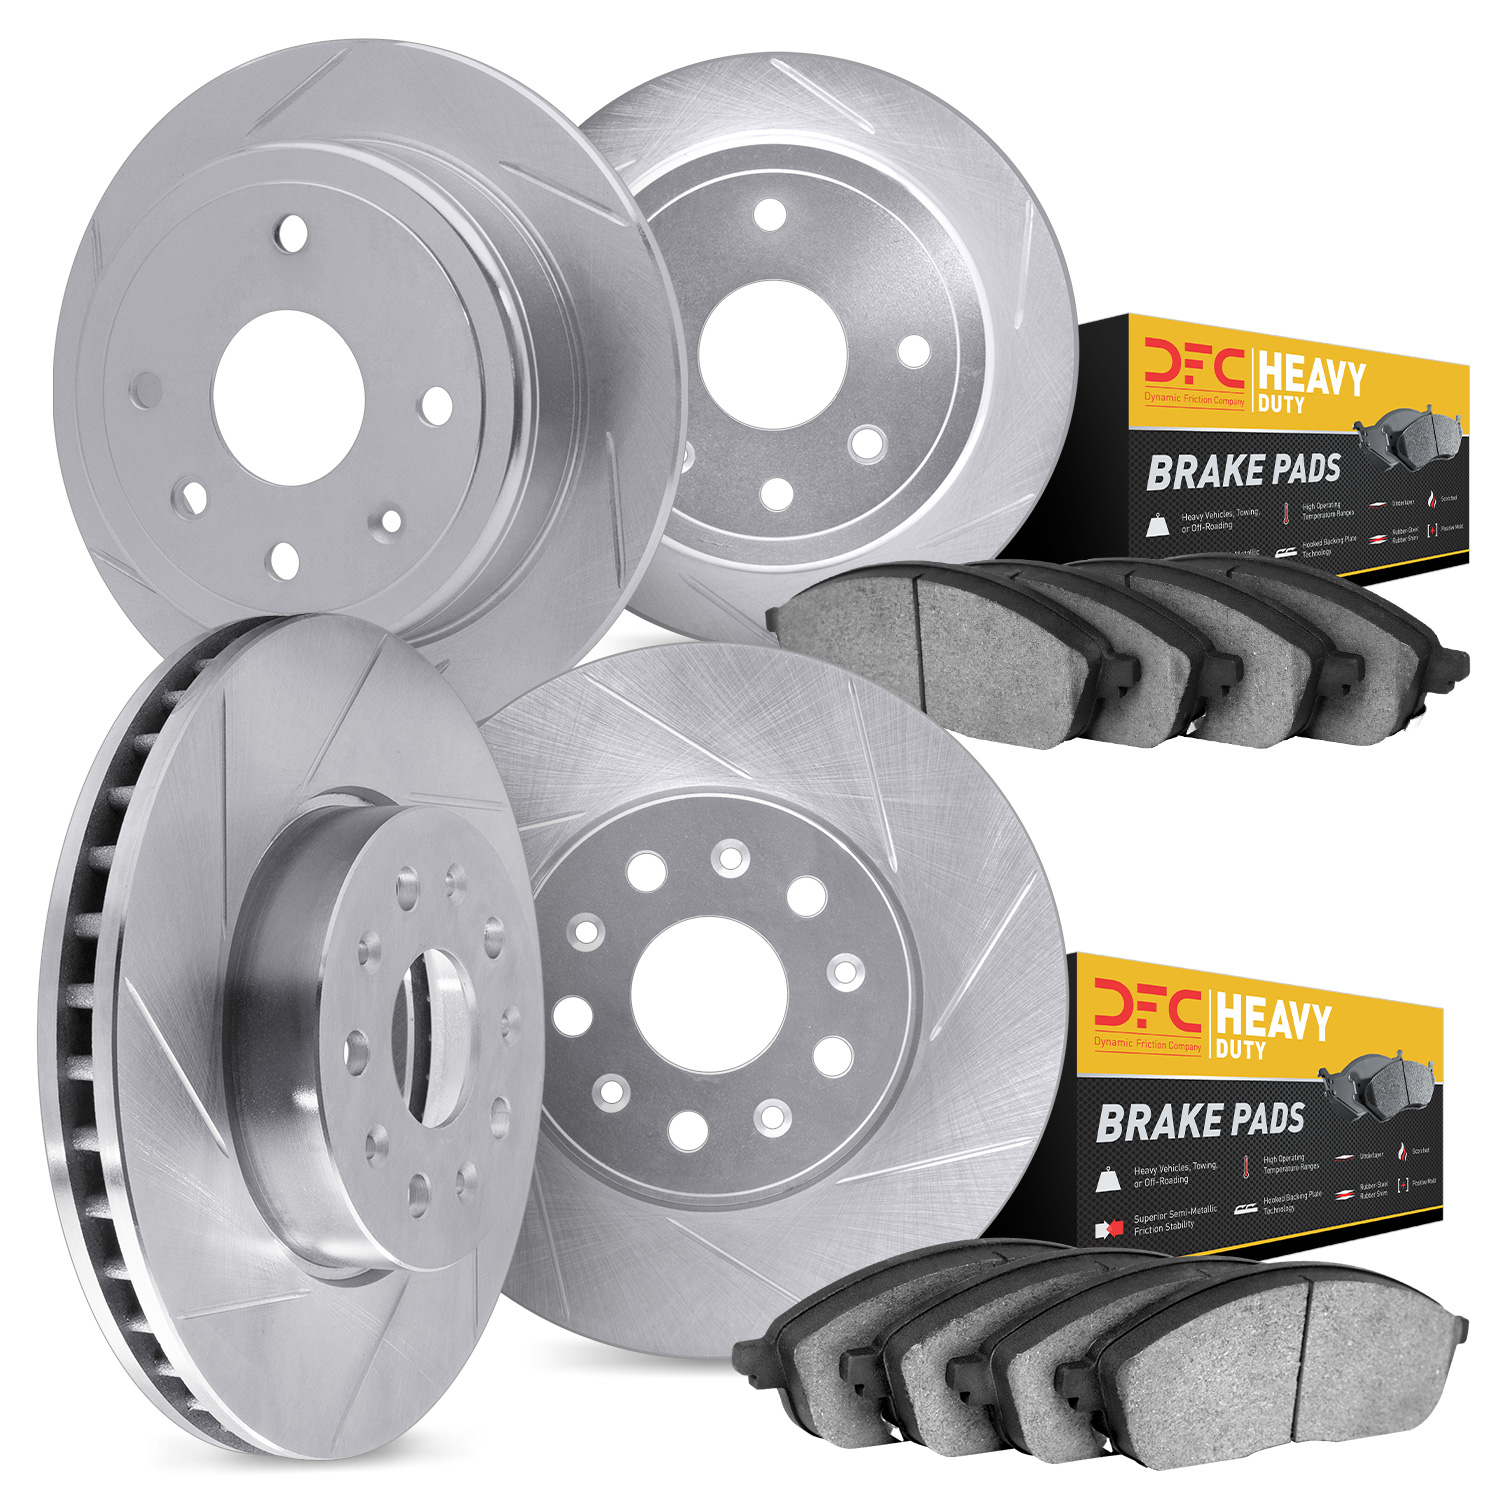 5204-55003 Slotted Brake Rotors w/Heavy-Duty Brake Pads Kits [Silver], 2003-2011 Ford/Lincoln/Mercury/Mazda, Position: Front and